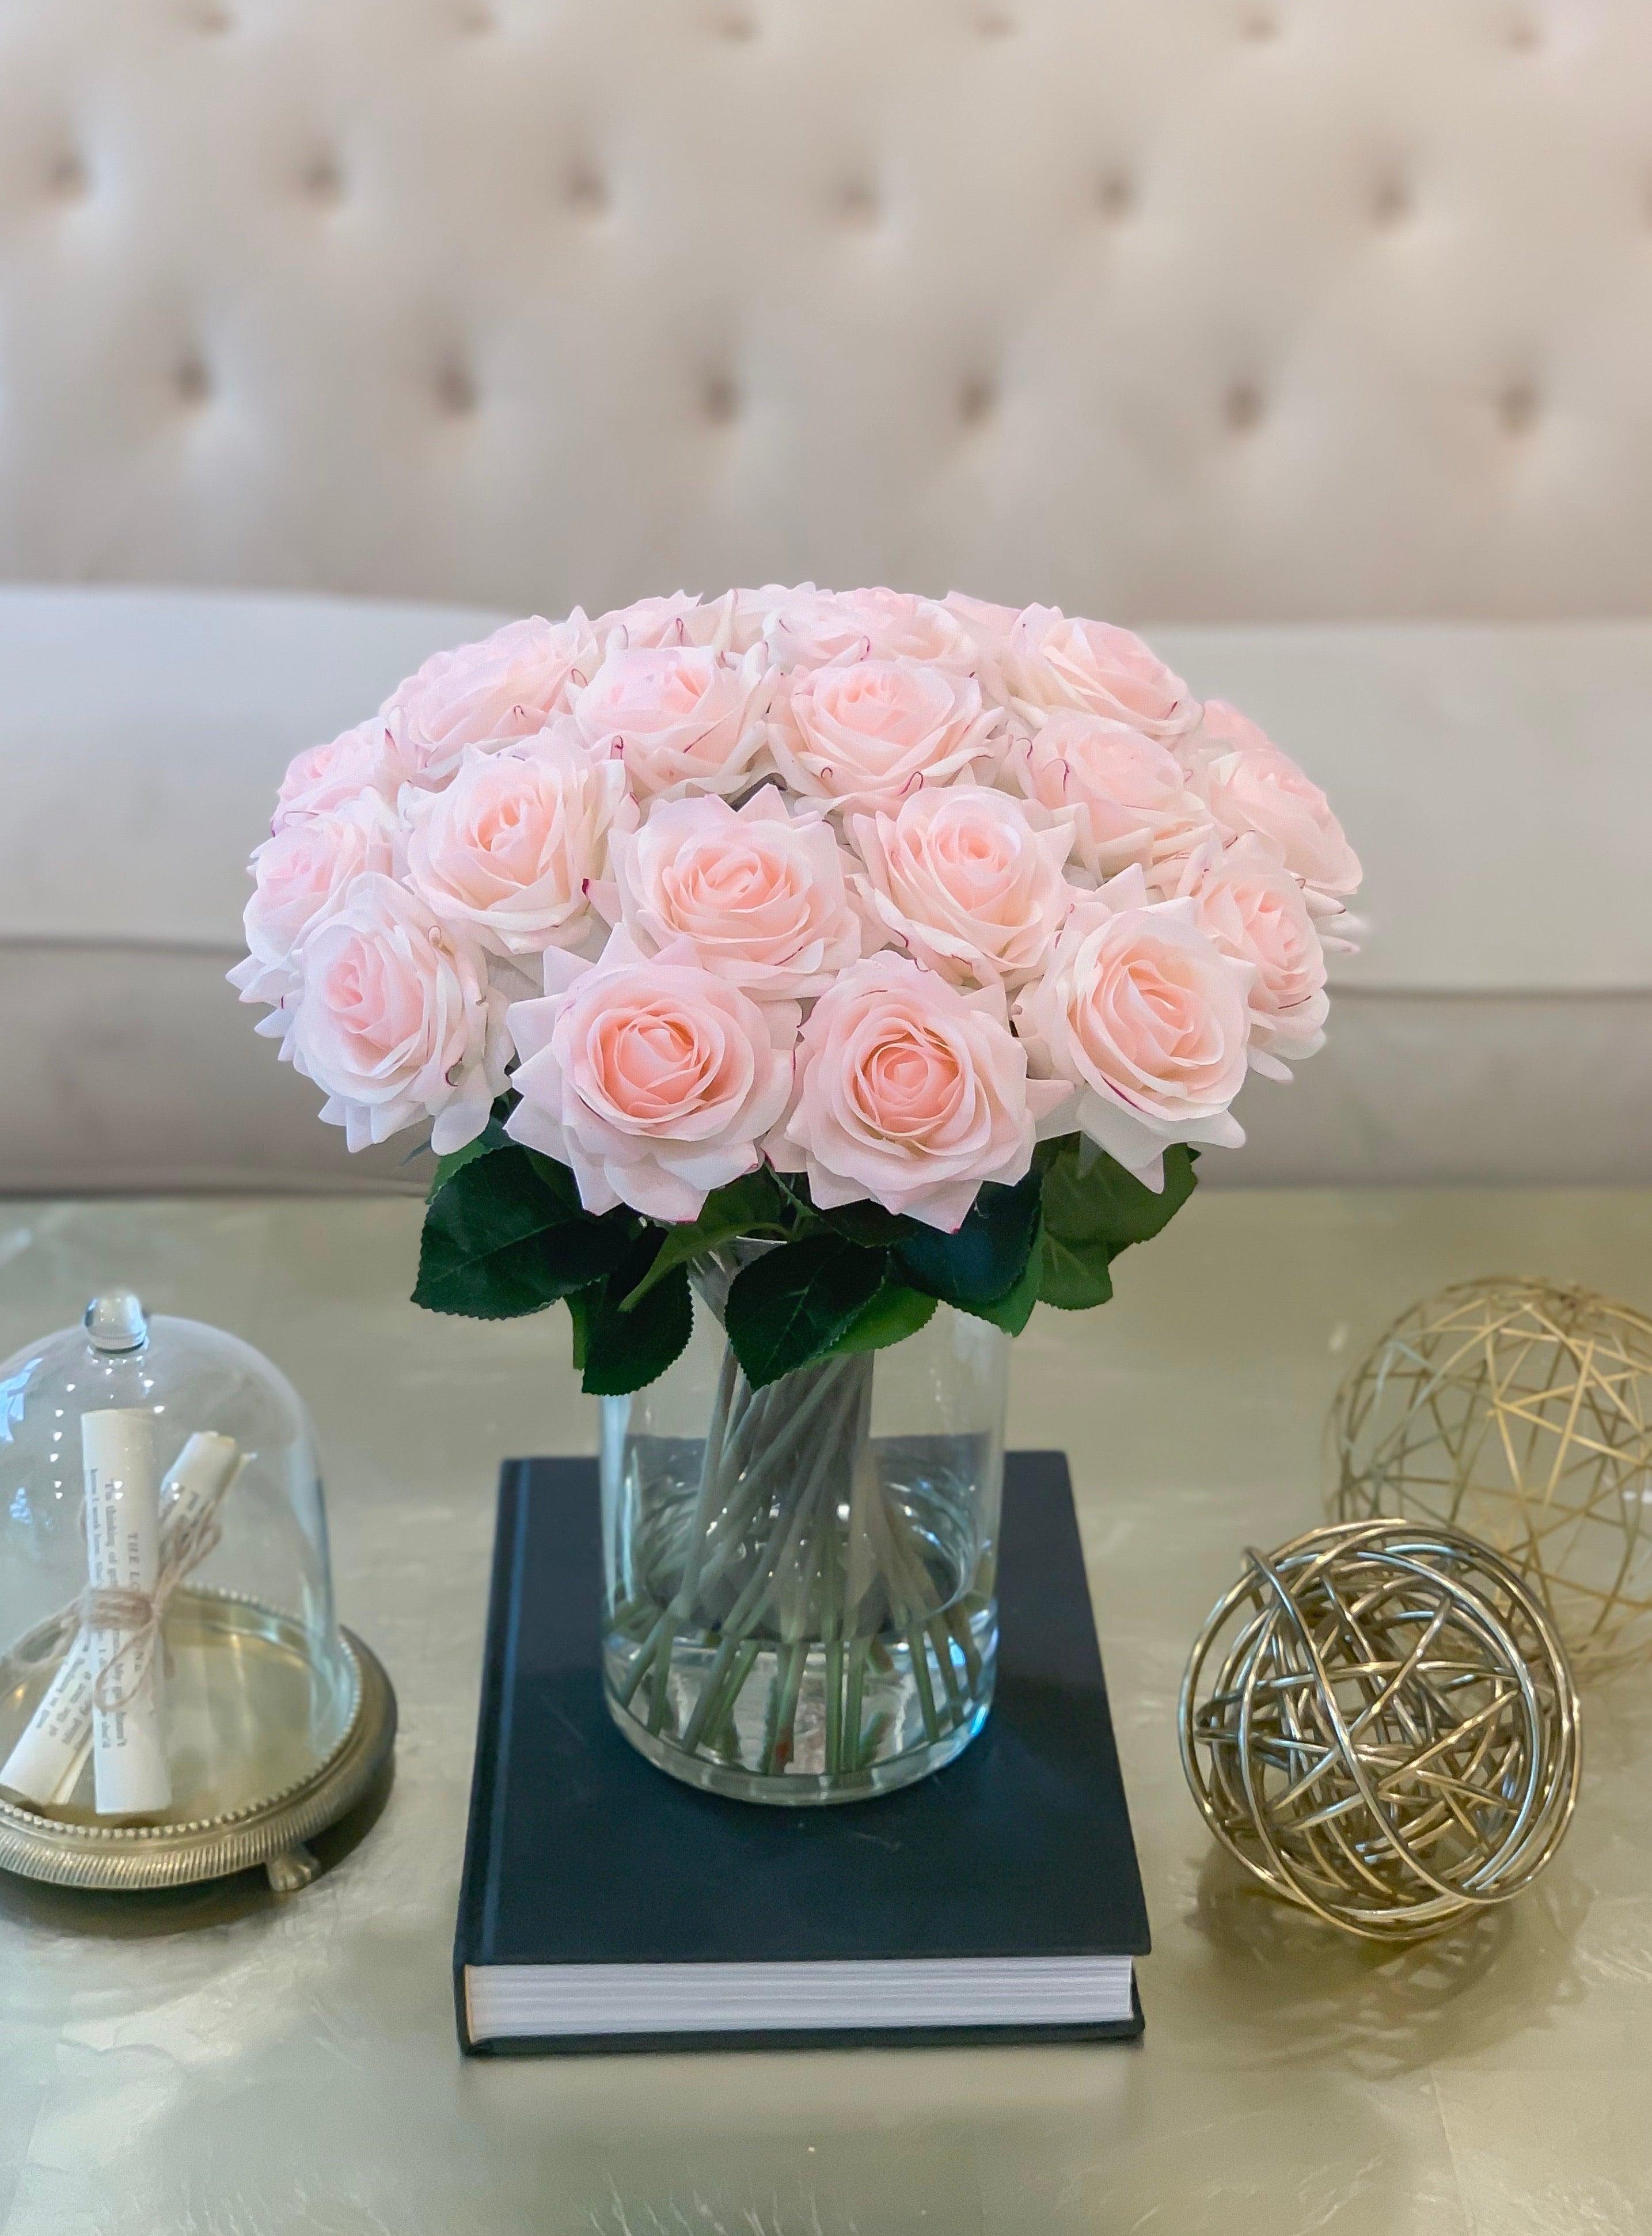 Large Dome Rose Centerpiece – Flovery